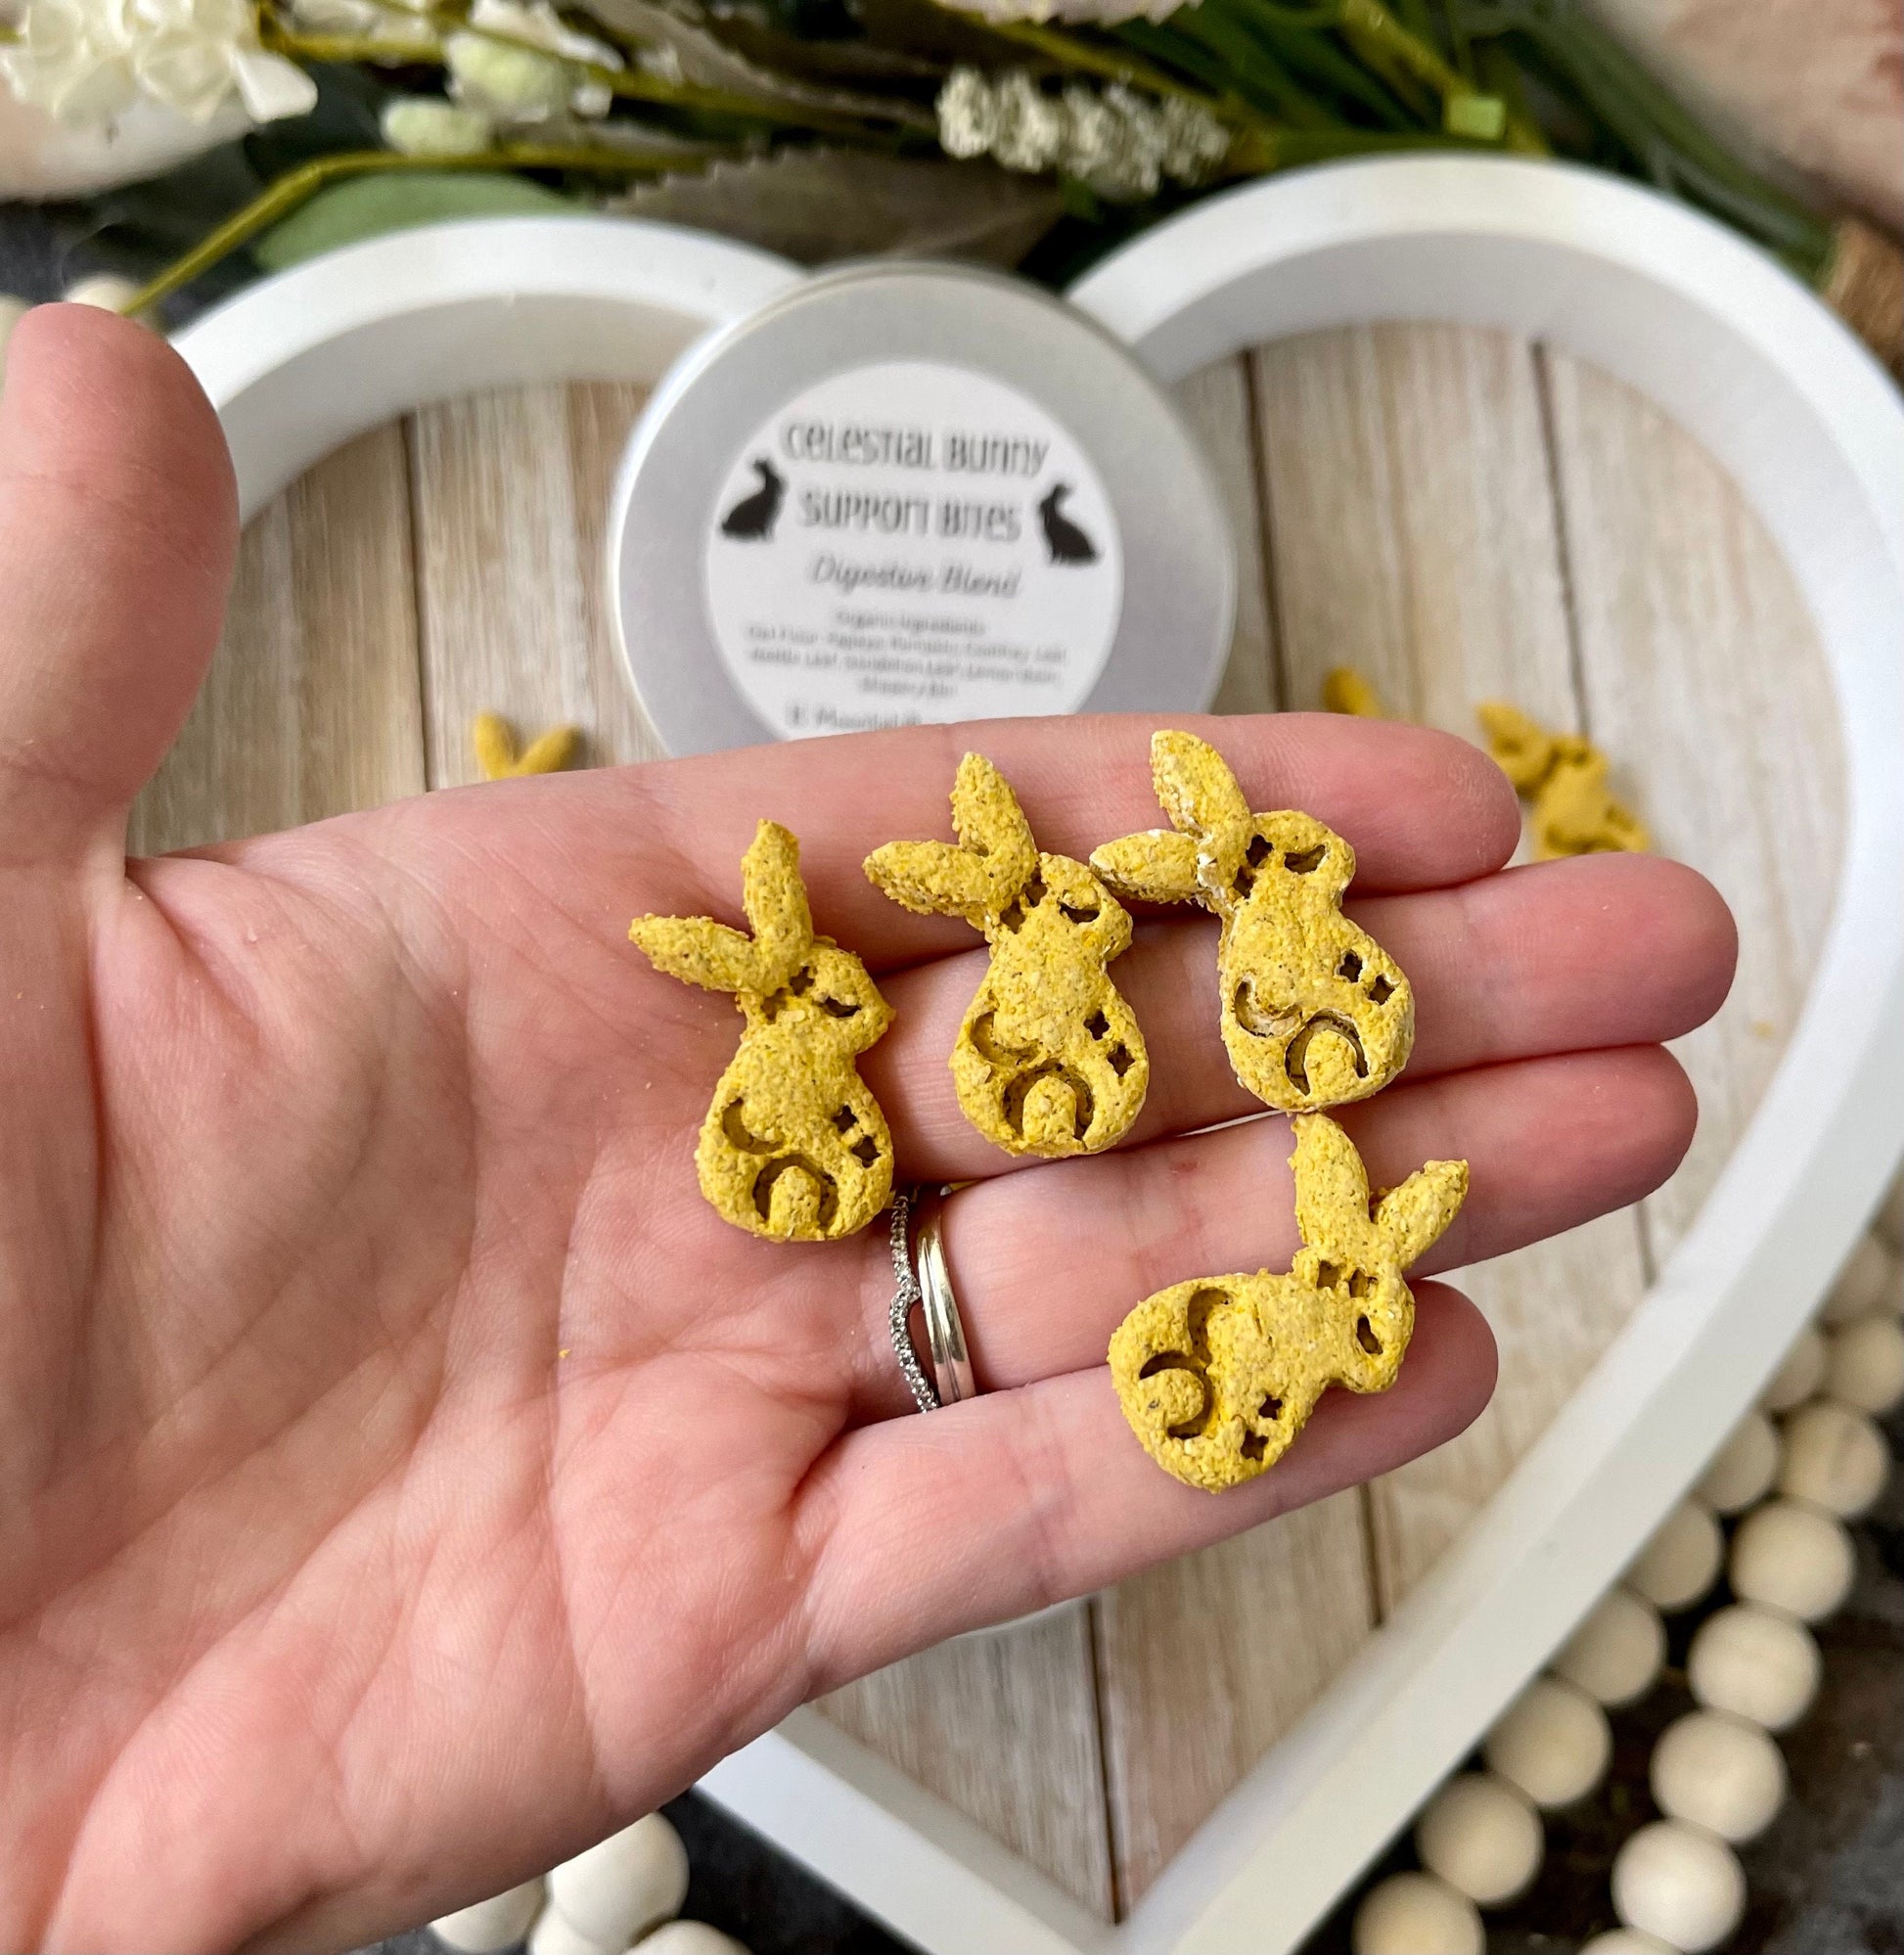 Celestial Bunny Bites~GI Blend~ Unique handcrafted all natural, healthy & organic bite sized treat for rabbits, hamsters+other small animals